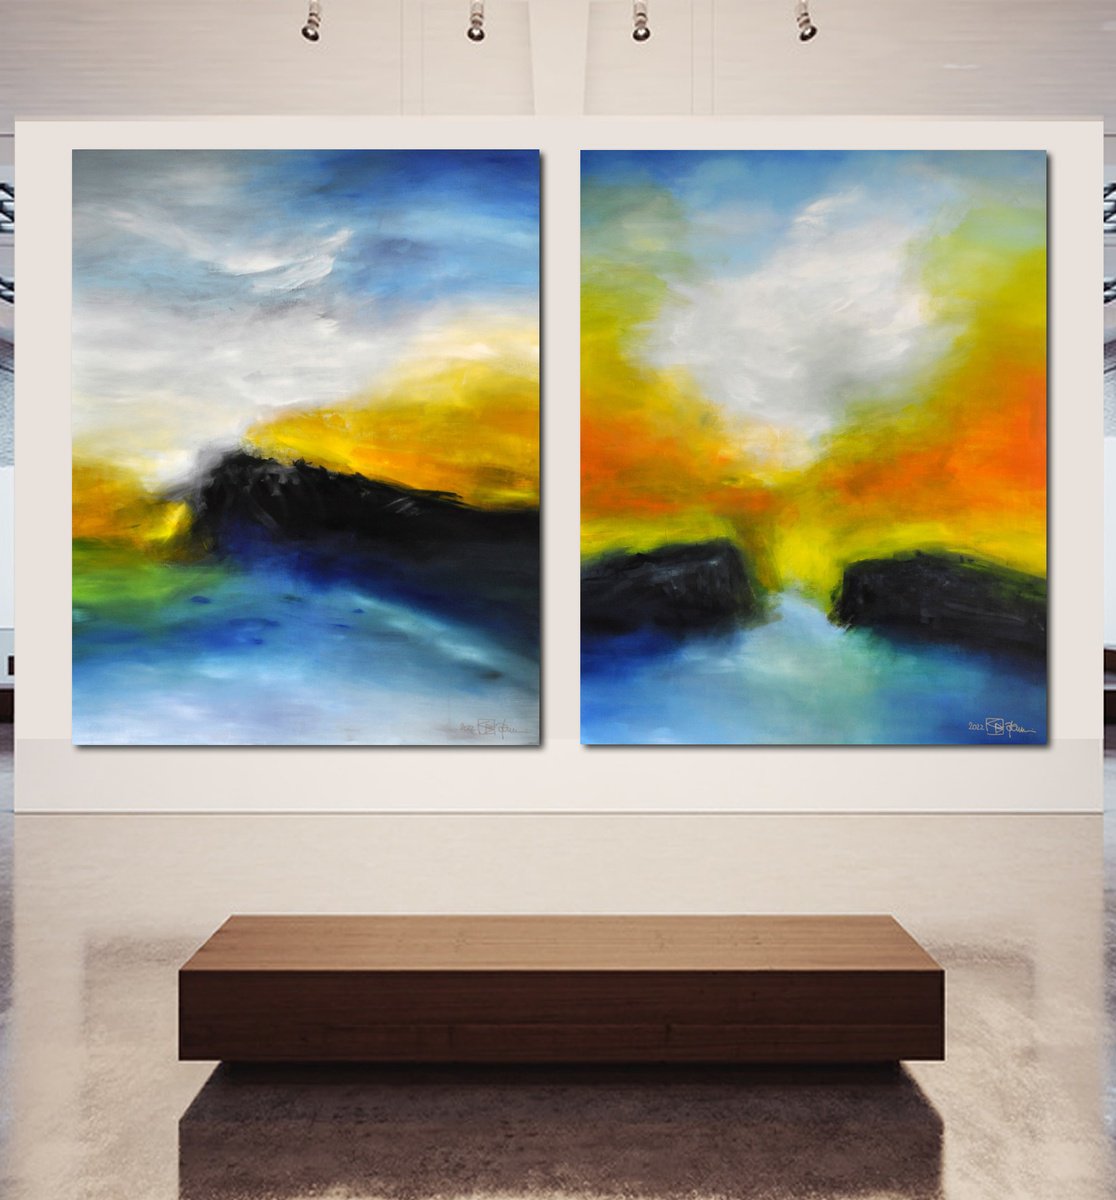 I AM THE SEA AND THE COAST (diptych) by CHRISTIAN BAHR